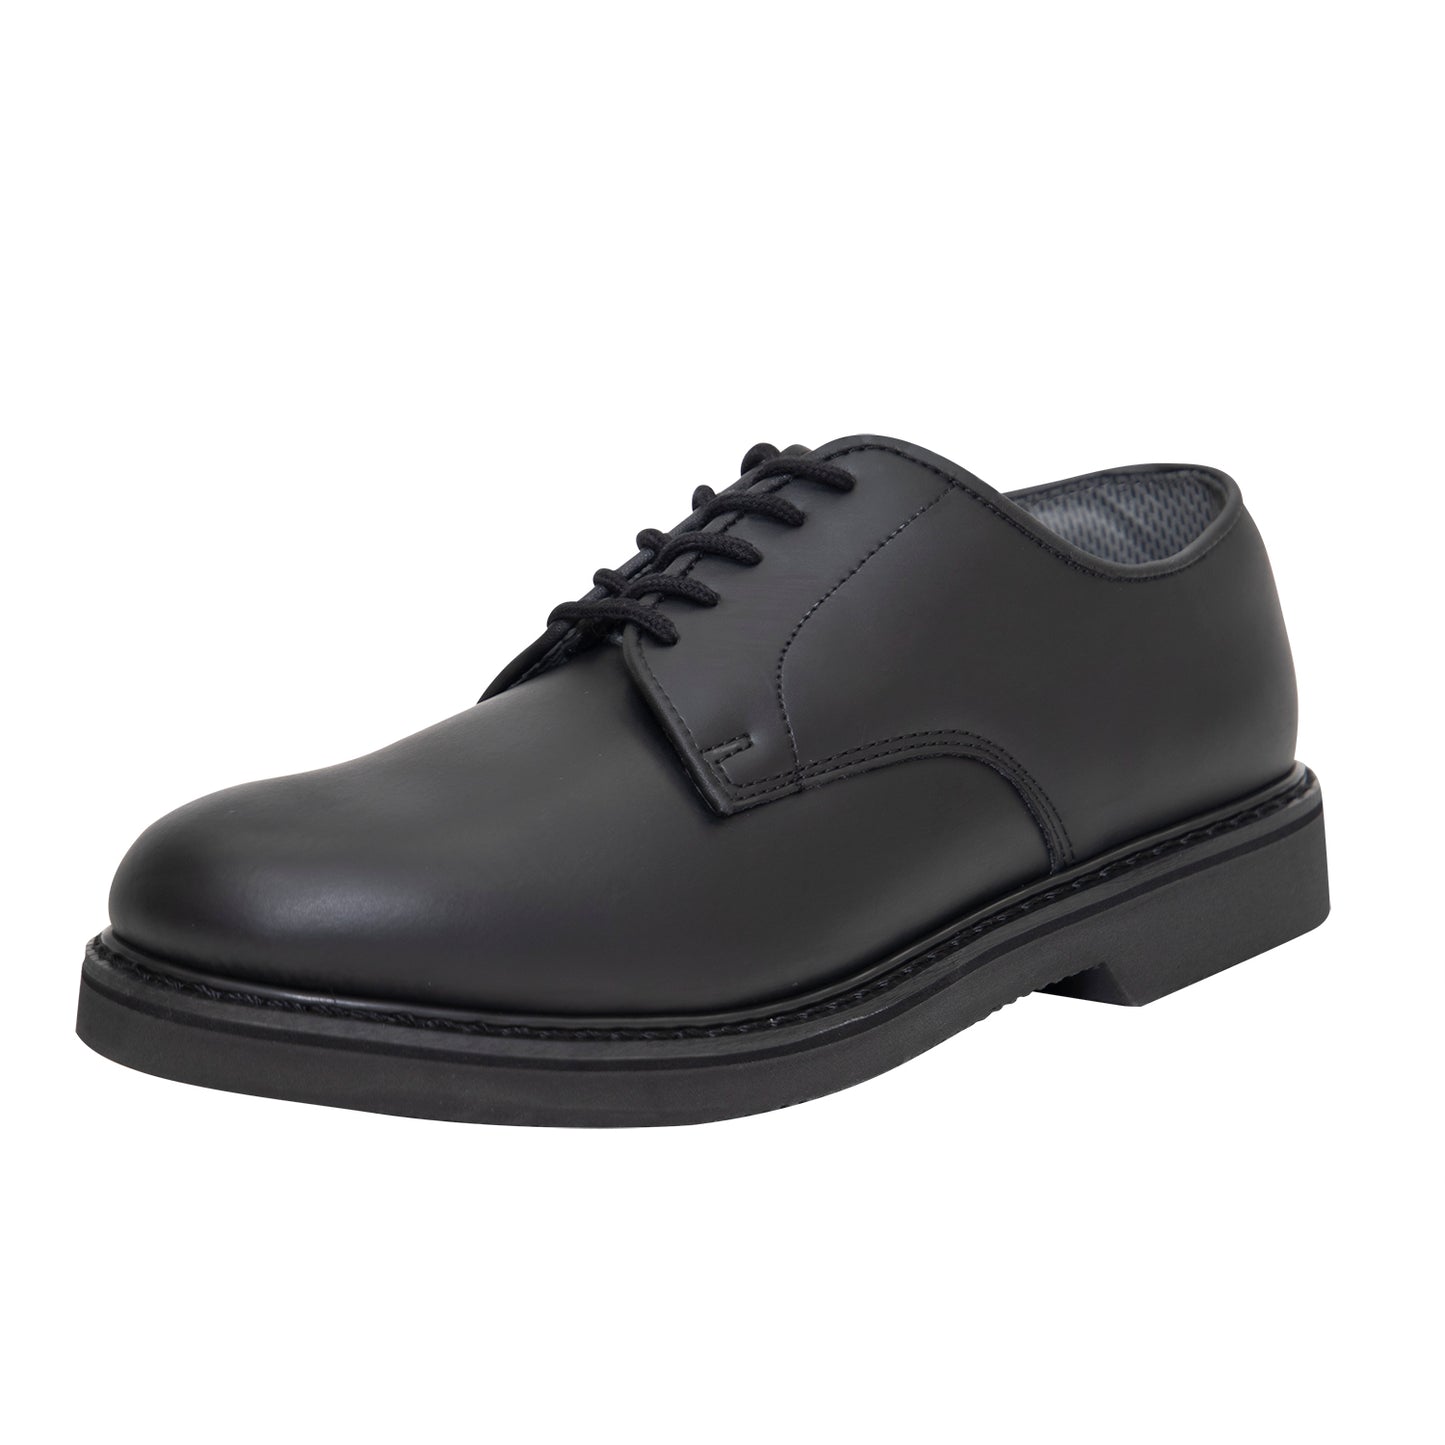 Rothco Flat Finish Uniform Oxford Leather Formal Shoes